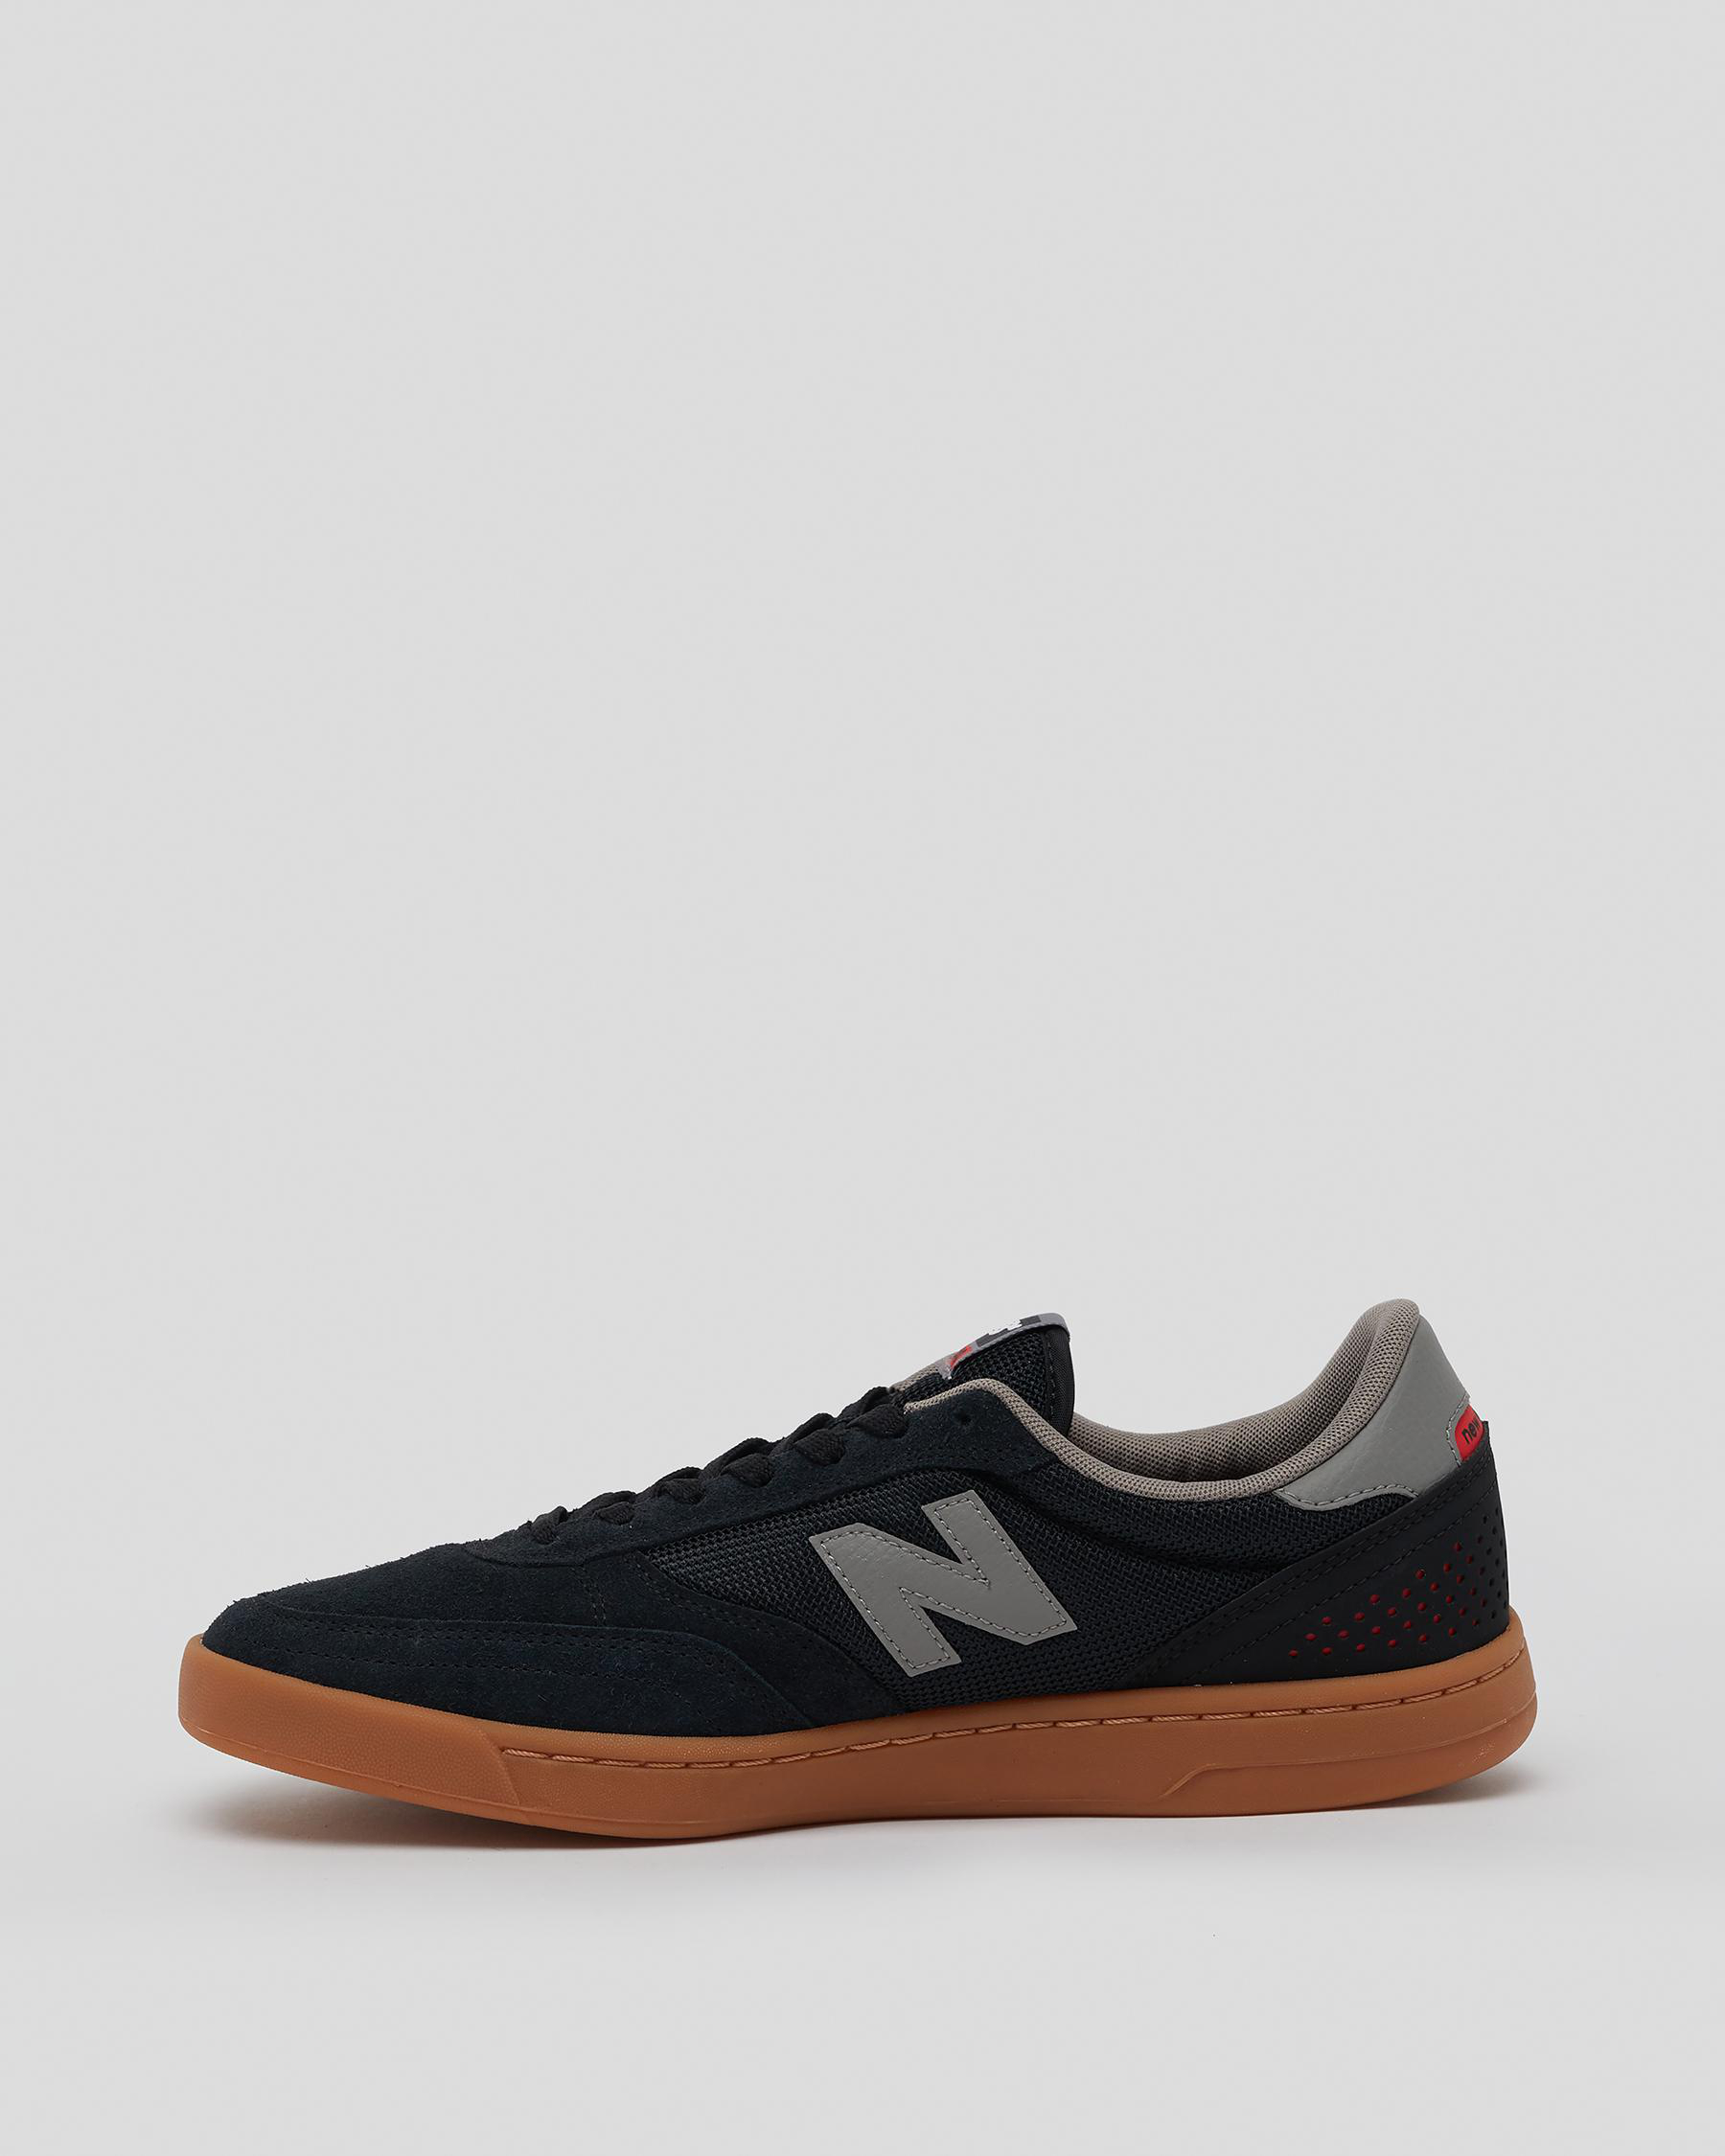 New Balance Nb 440 Shoes In Black/gum - Fast Shipping & Easy Returns ...